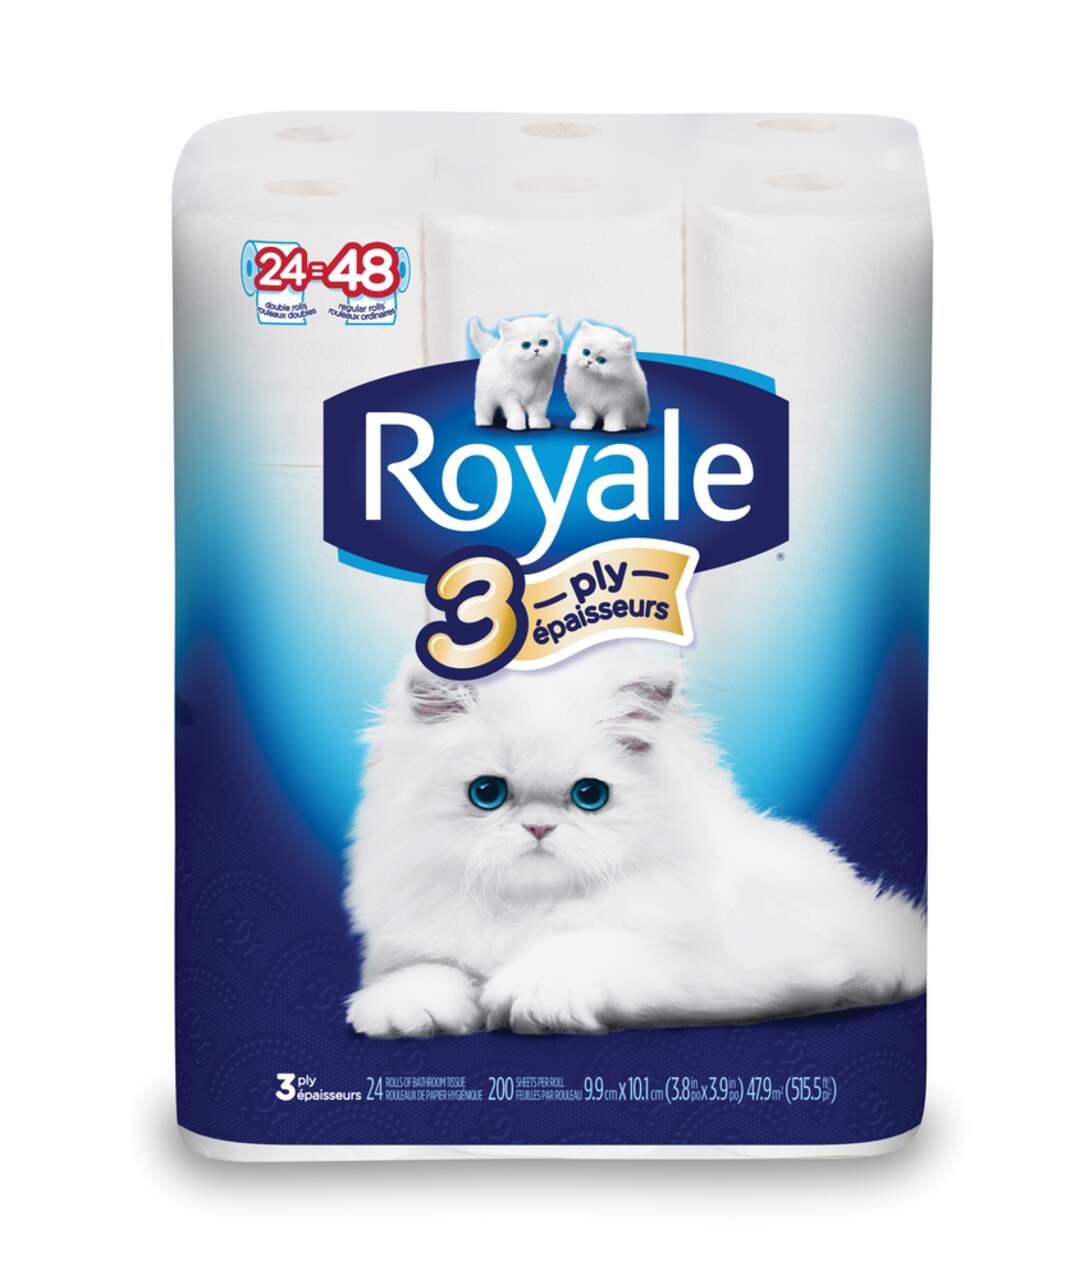 Royale Double Toilet Paper, 24-roll